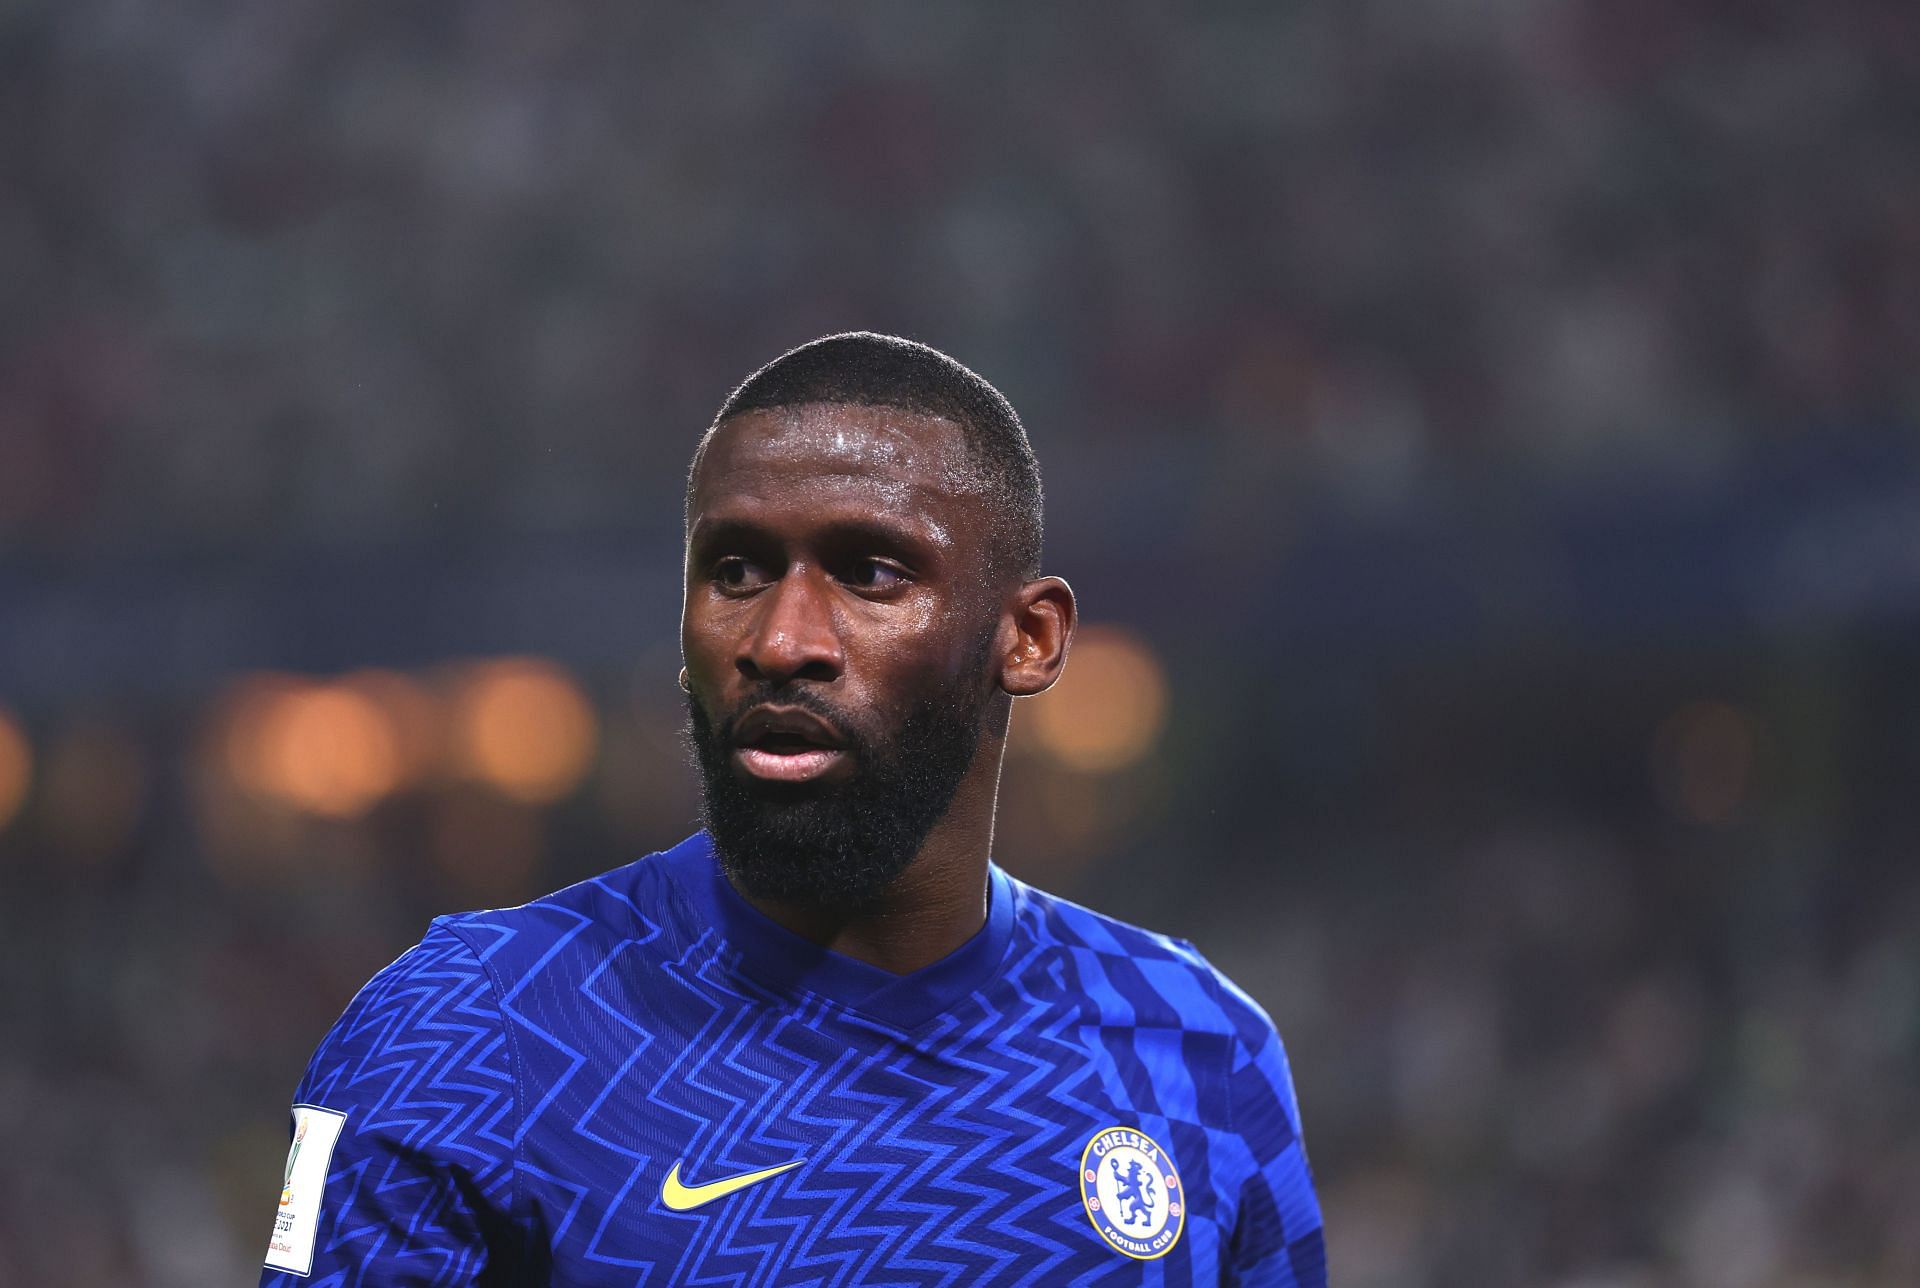 Rudiger has been among the best centre-backs in Premier League and his services would be gladly welcomed by several football clubs